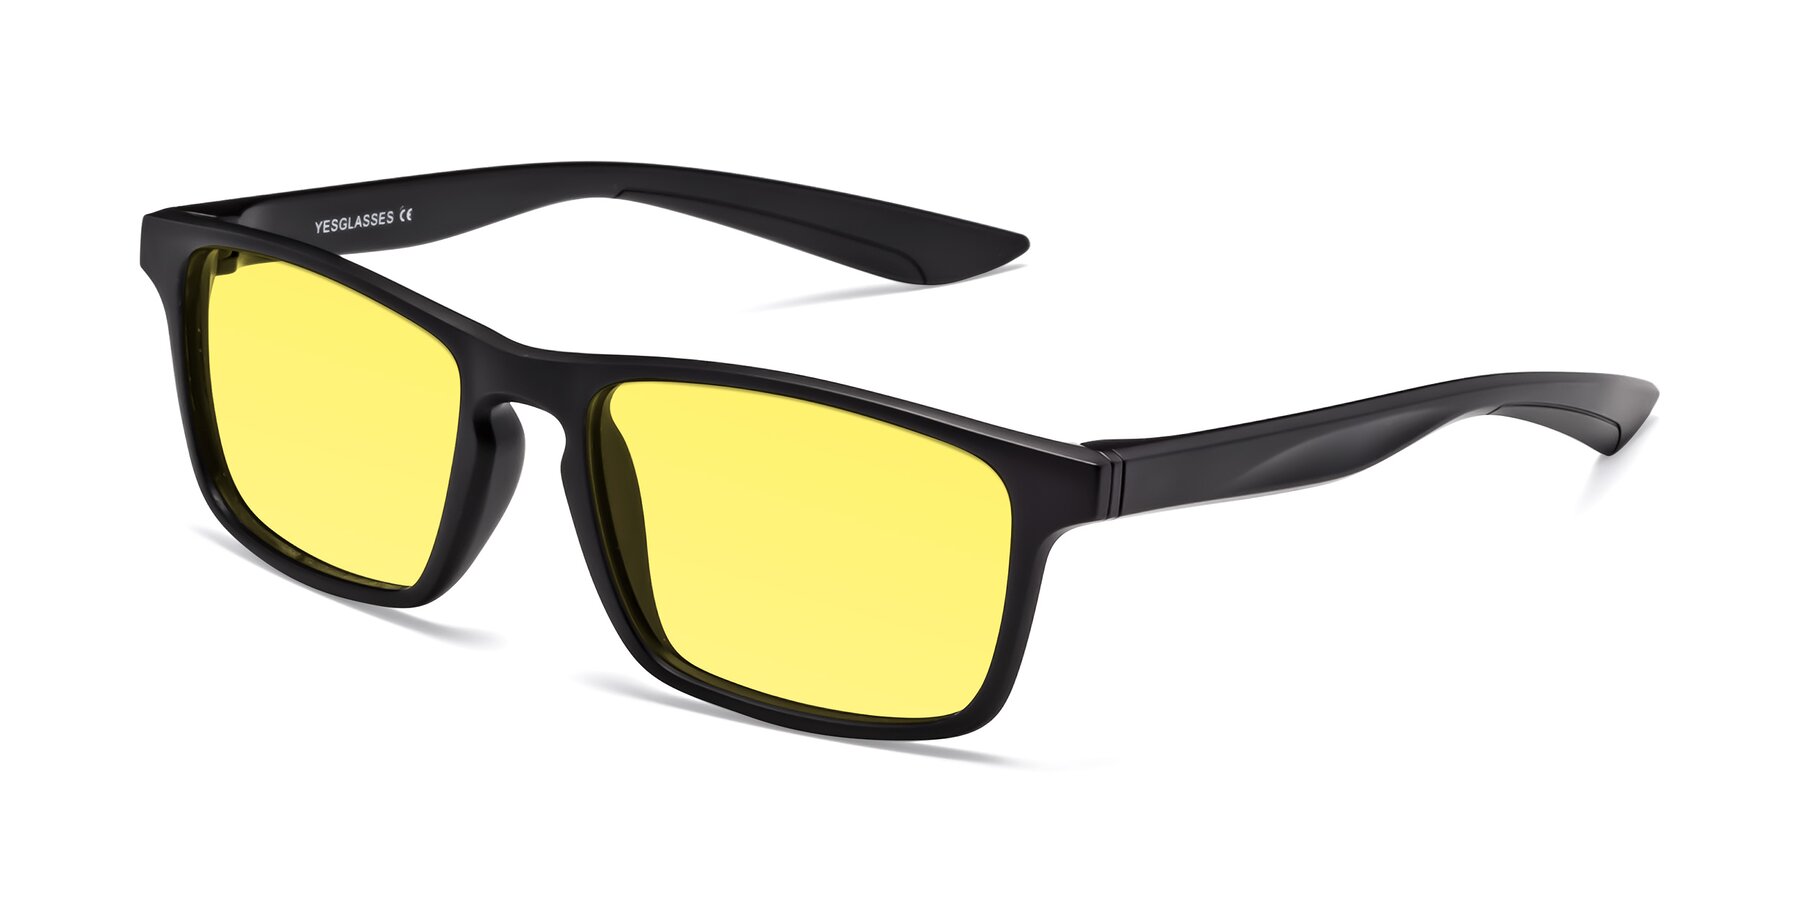 Angle of Passion in Matte Black with Medium Yellow Tinted Lenses